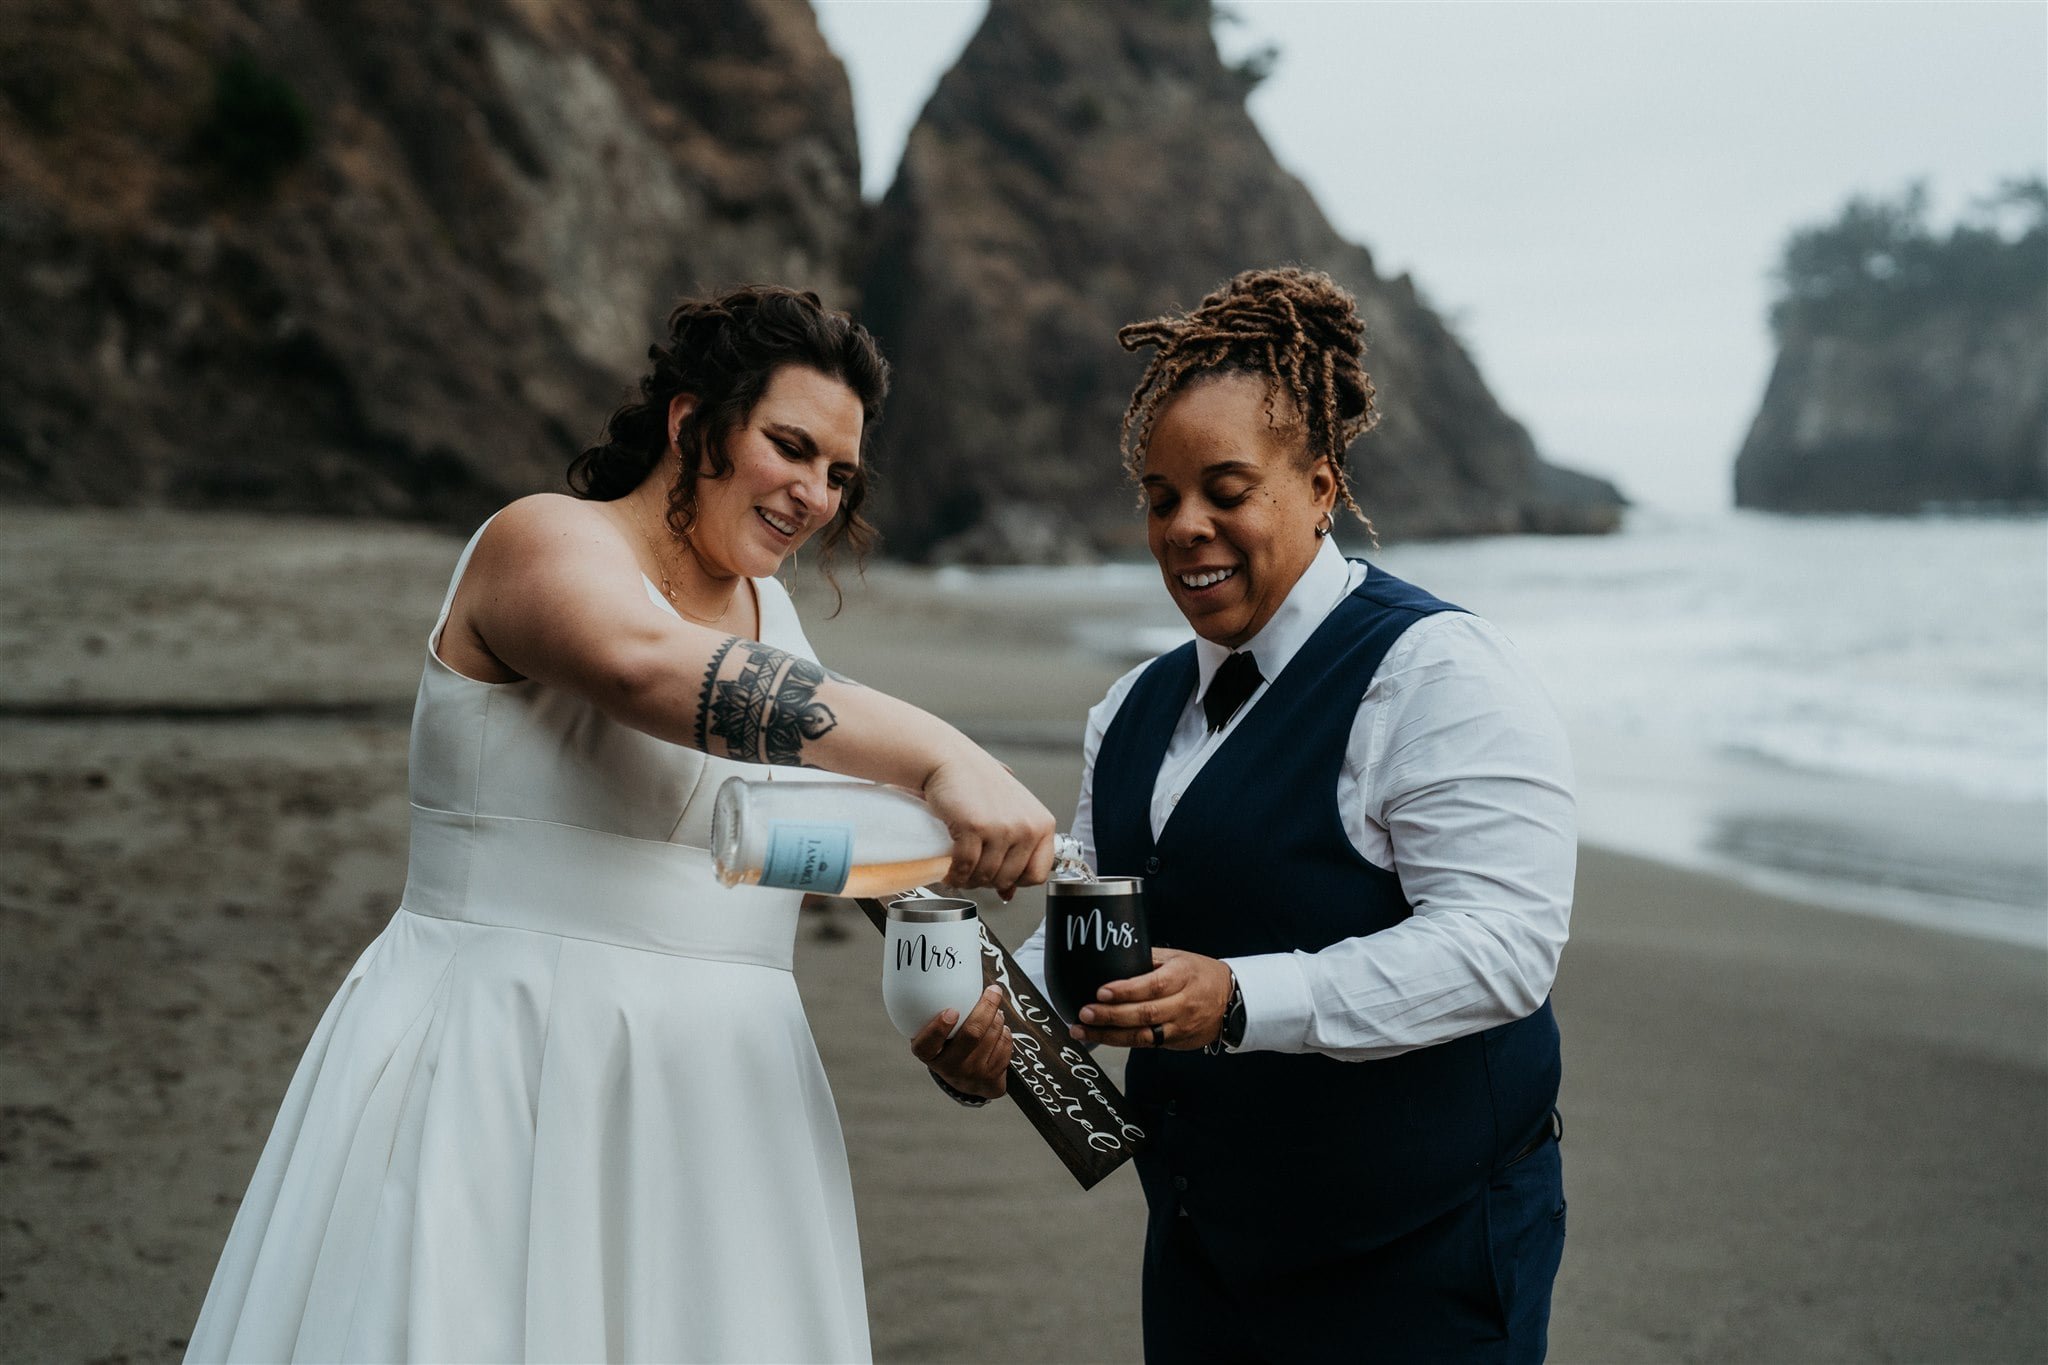 Brides pour champagne into custom mugs during their Southern Oregon Coast elopement on the beach